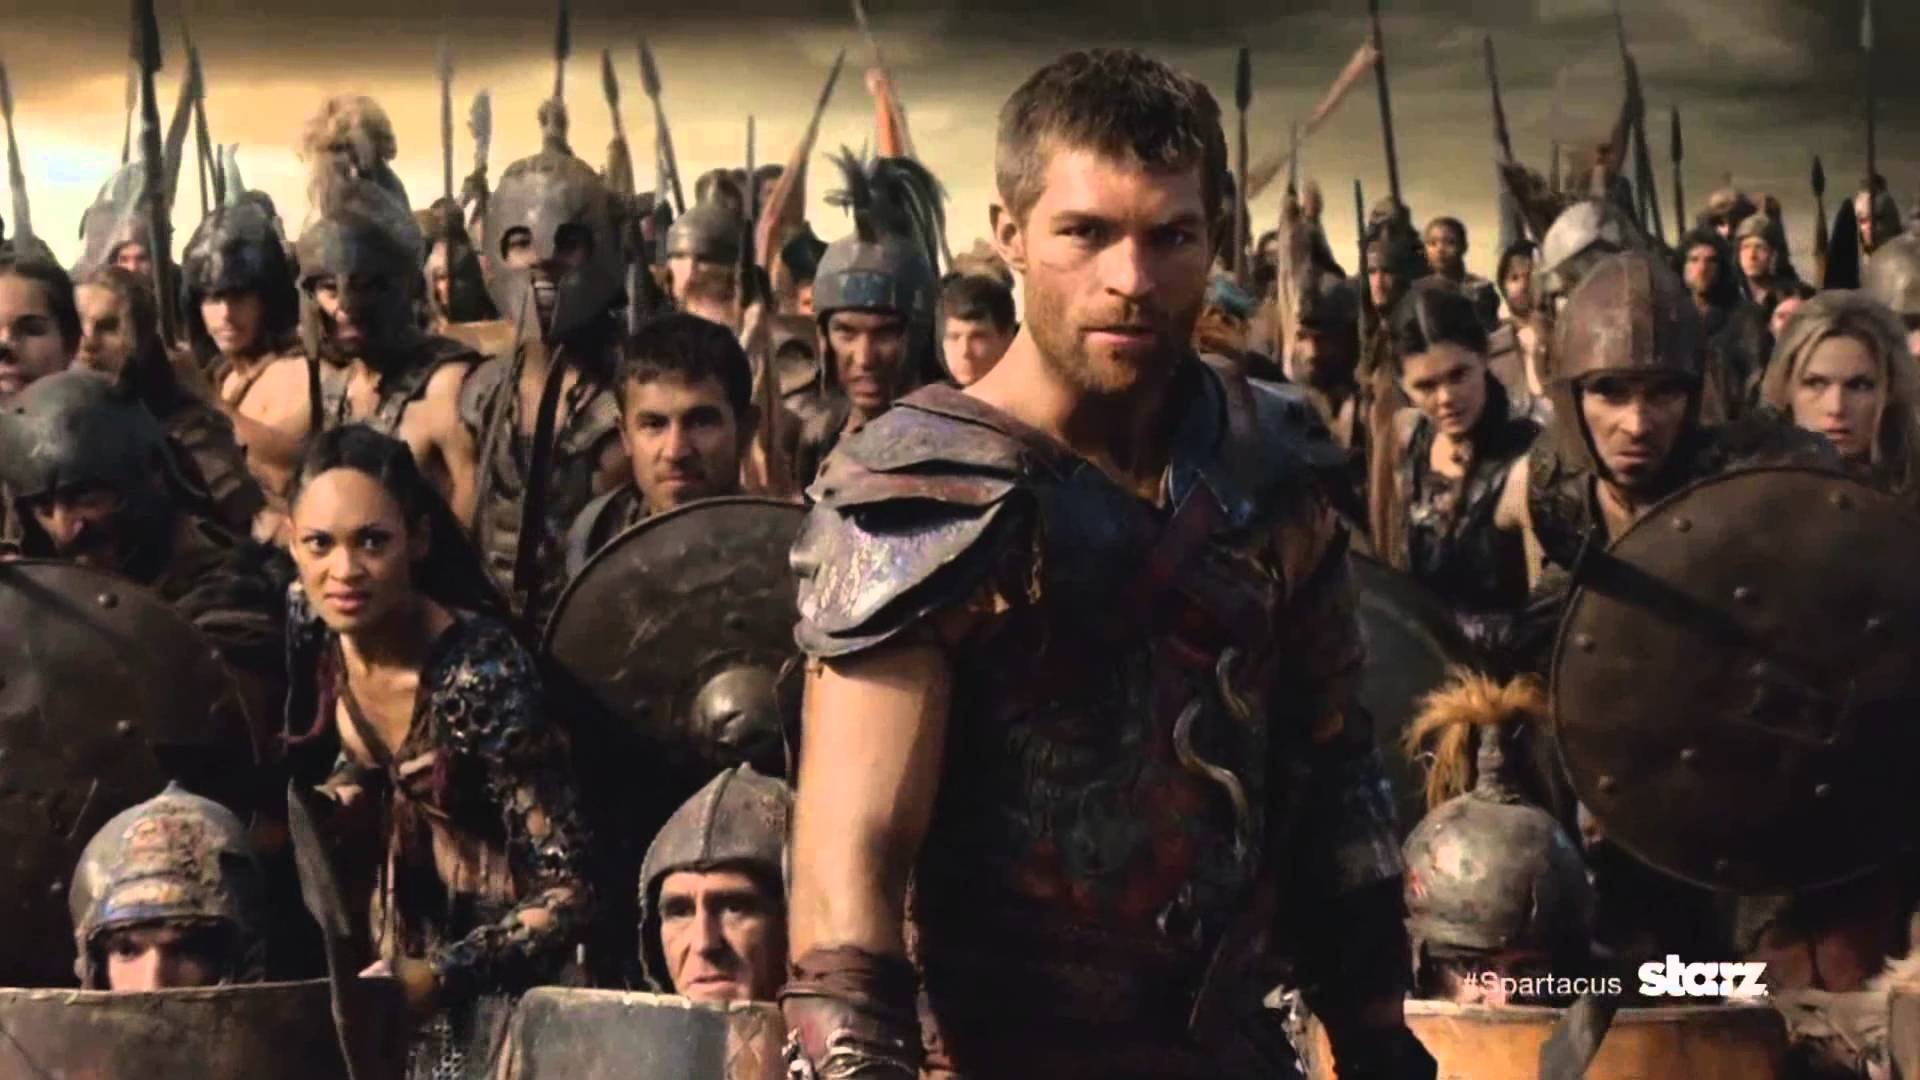 Spartacus Series Fantasy Action Adventure Biography Television Warrior 114 Wallpapers Hd Desktop And Mobile Backgrounds